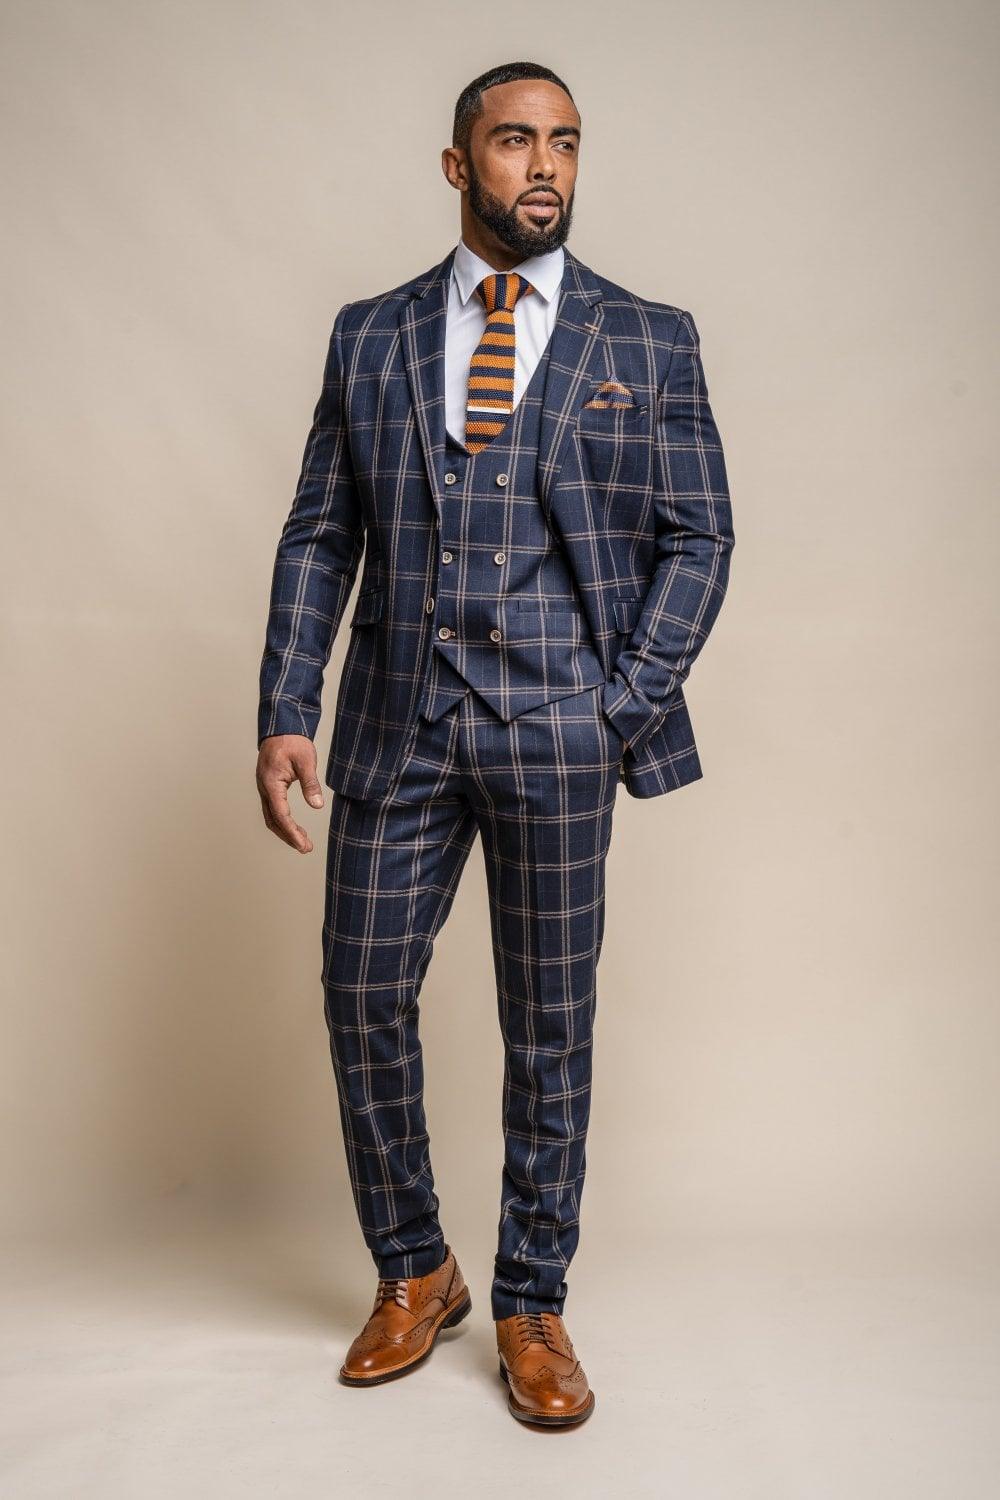 House of Cavani Hardy Navy Checked Three Piece Suit - Clothing